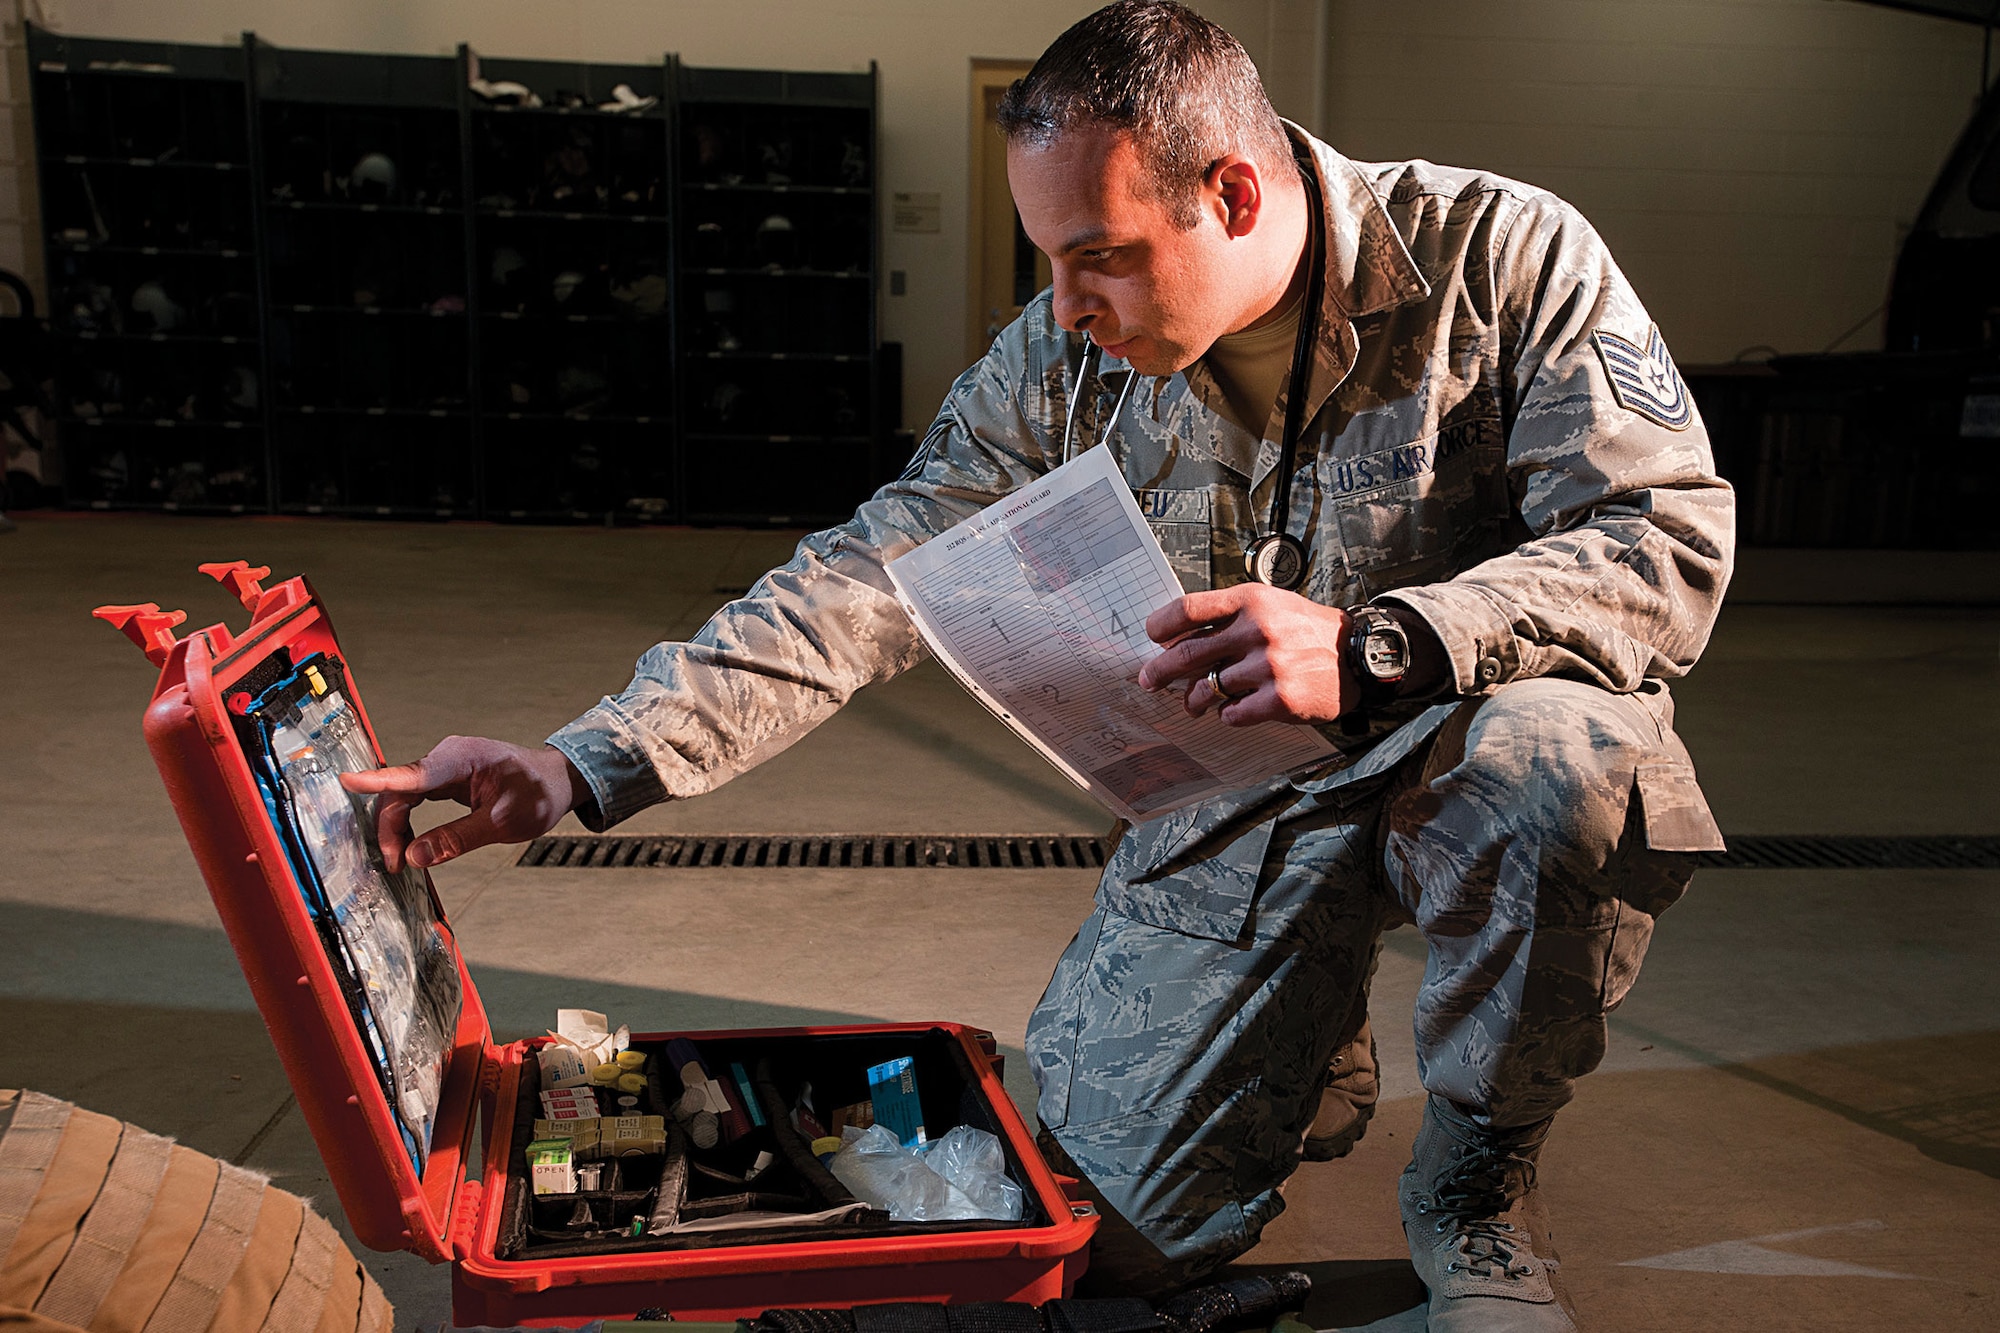 Tech. Sgt. Darrell Mathieu, 212th Rescue Squadron independent duty medical technician, checks the inventory of medical equipment on Joint Base Elmendorf-Richardson Oct. 12. (U.S. Air Force photo/Staff Sgt. Zachary Wolf)